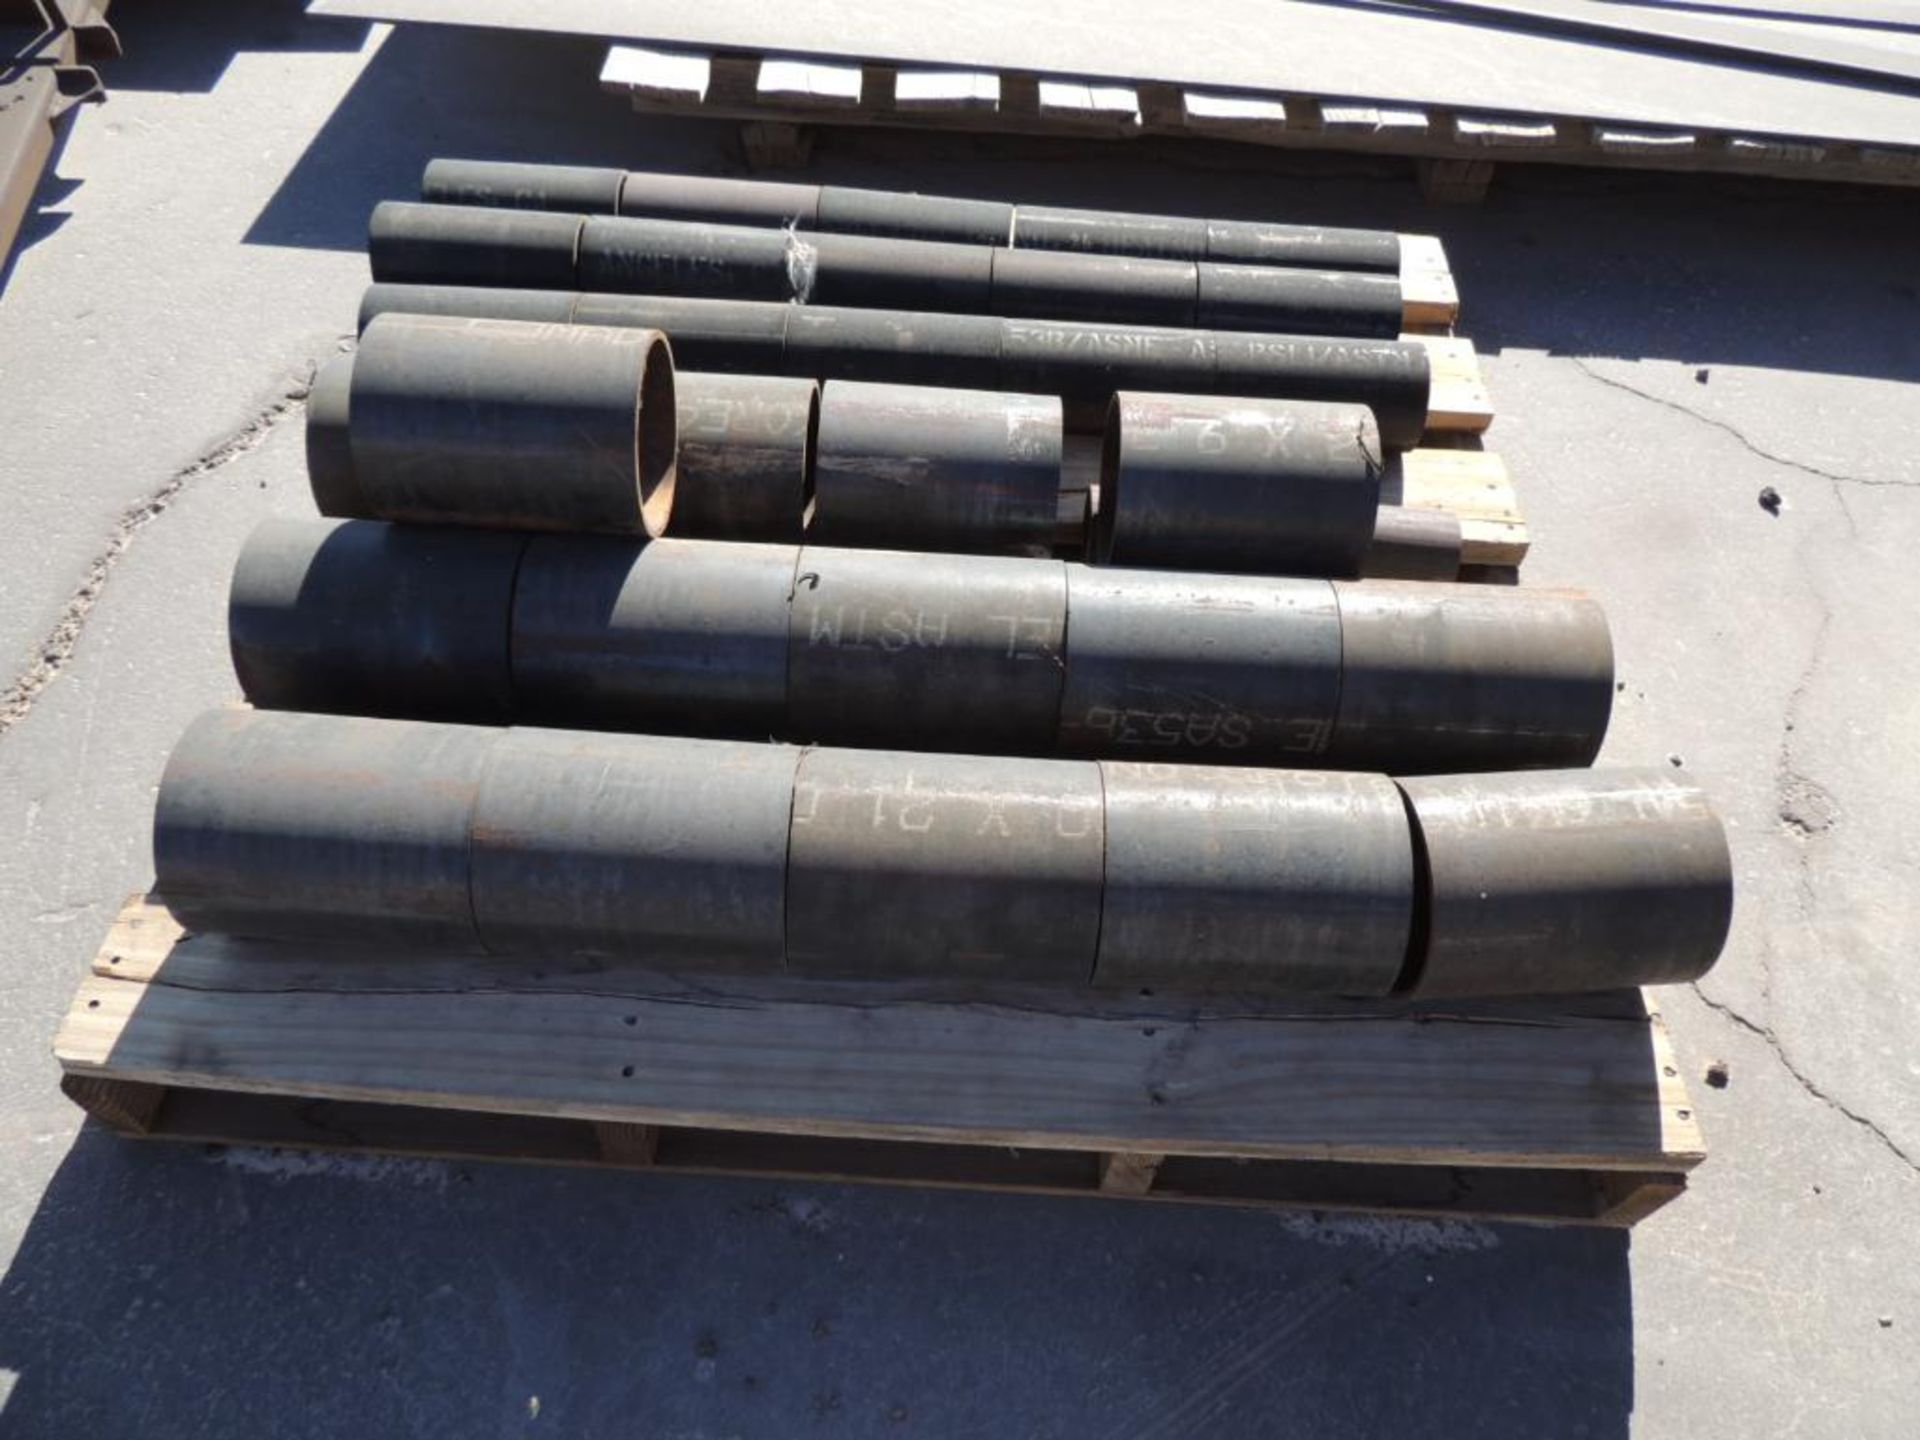 Assorted Metal Plate, Pre-Cut Material, Flanges, Pipe in Various Sizes (Yard) - Image 5 of 15